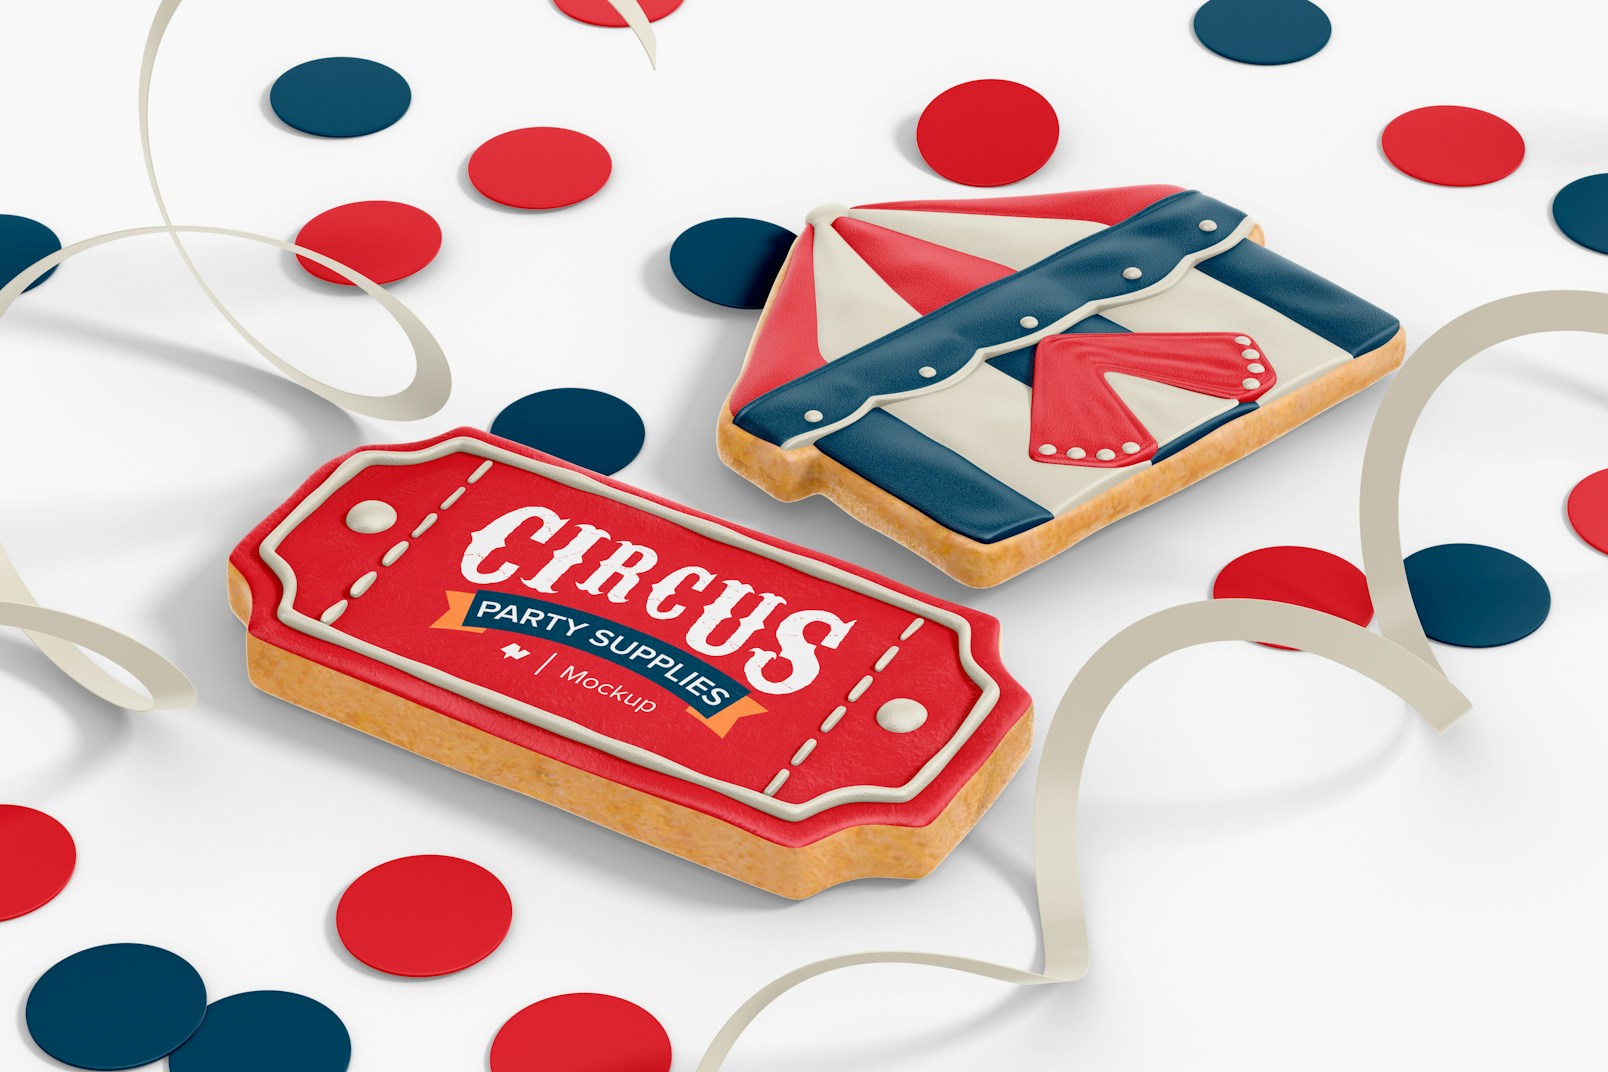 Circus Party Cookies Mockup, Perspective